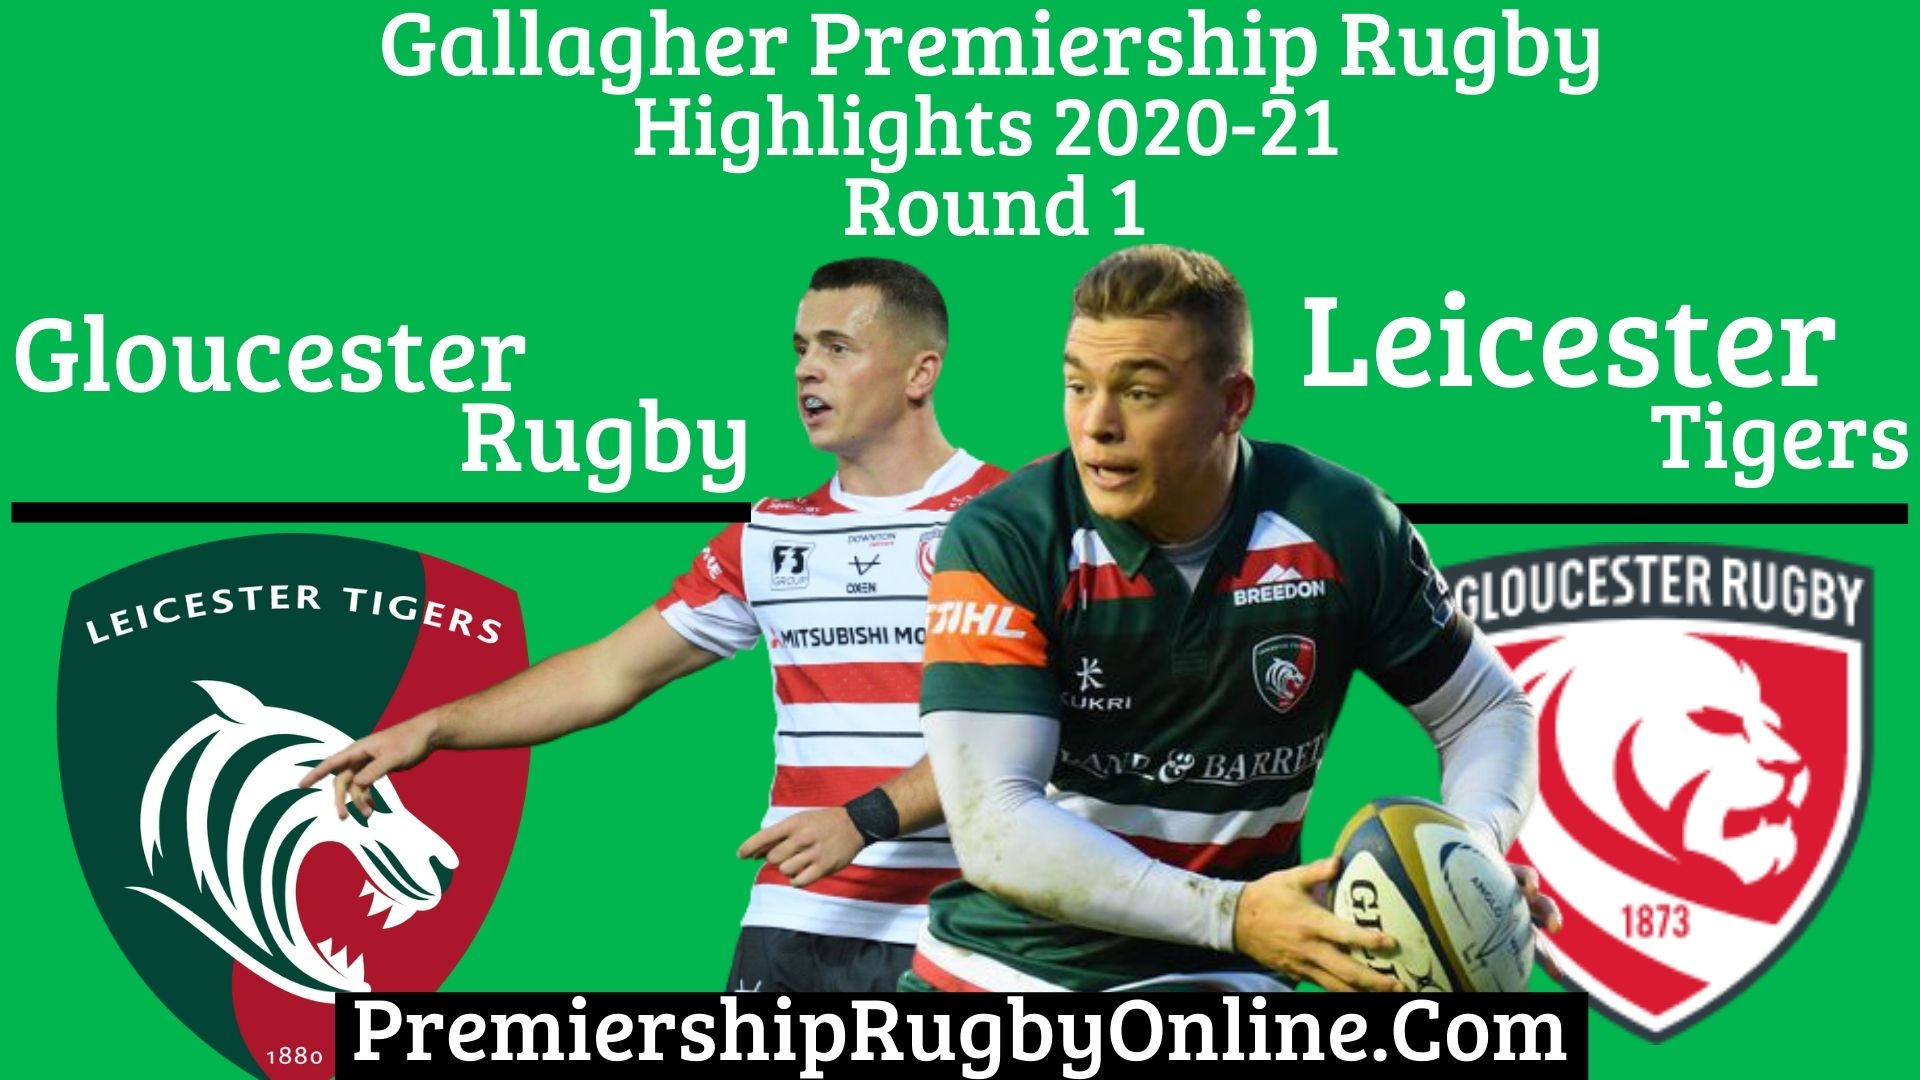 Leicester Tigers Vs Gloucester Rugby Highlights 2020 RD 1